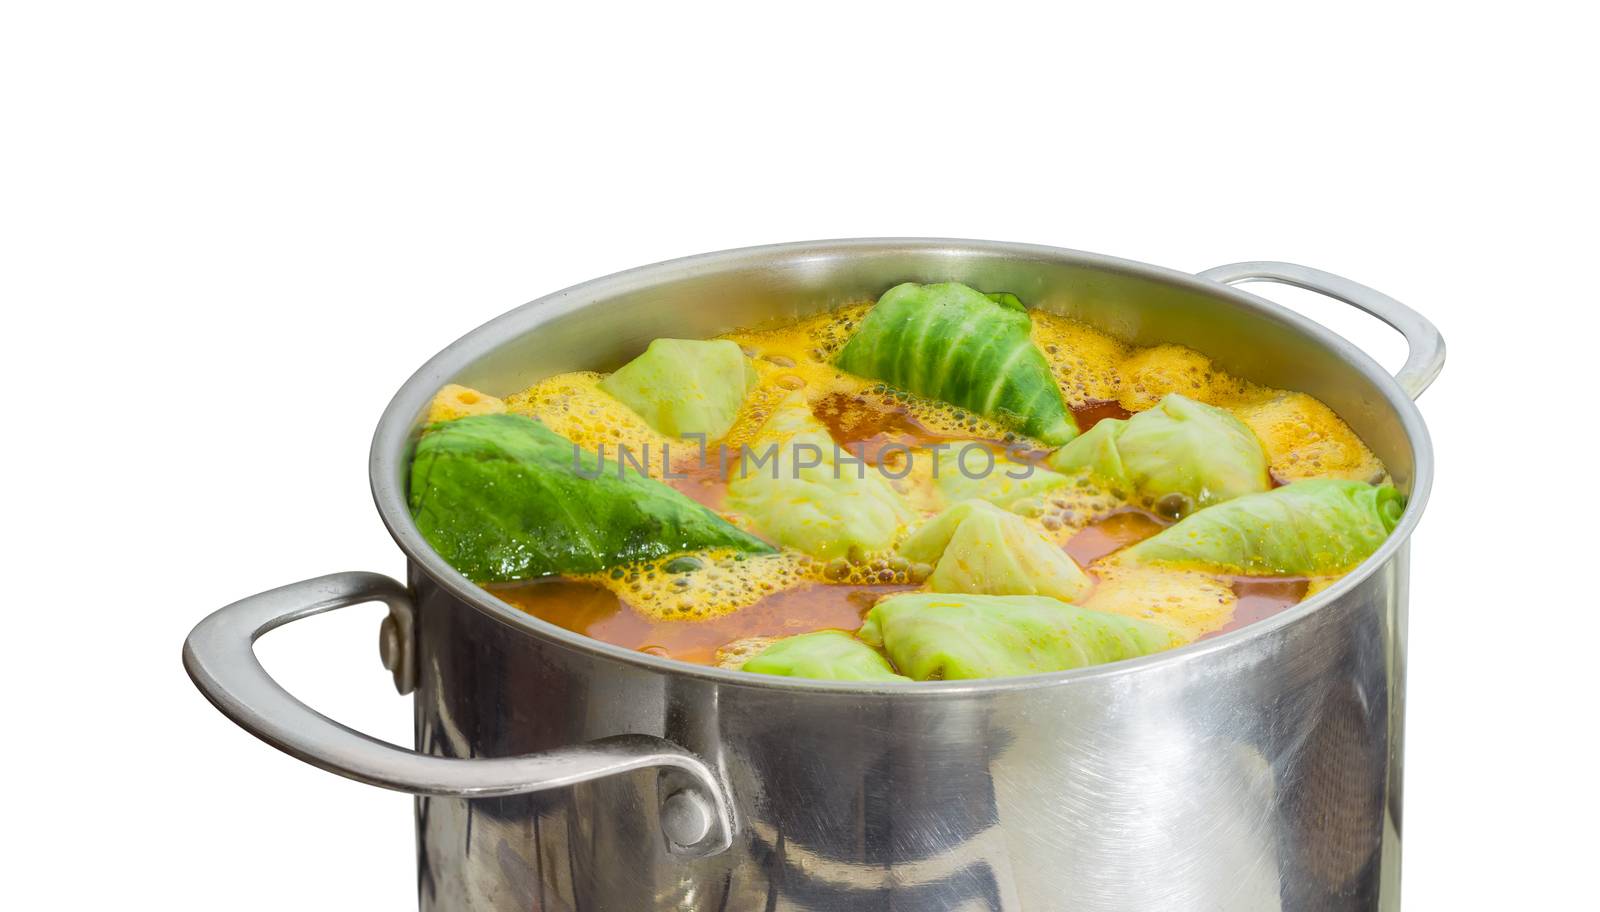 Fragment of the large stainless steel saucepan with stuffed cabbage rolls in boiling sauce during cooking on a light background
